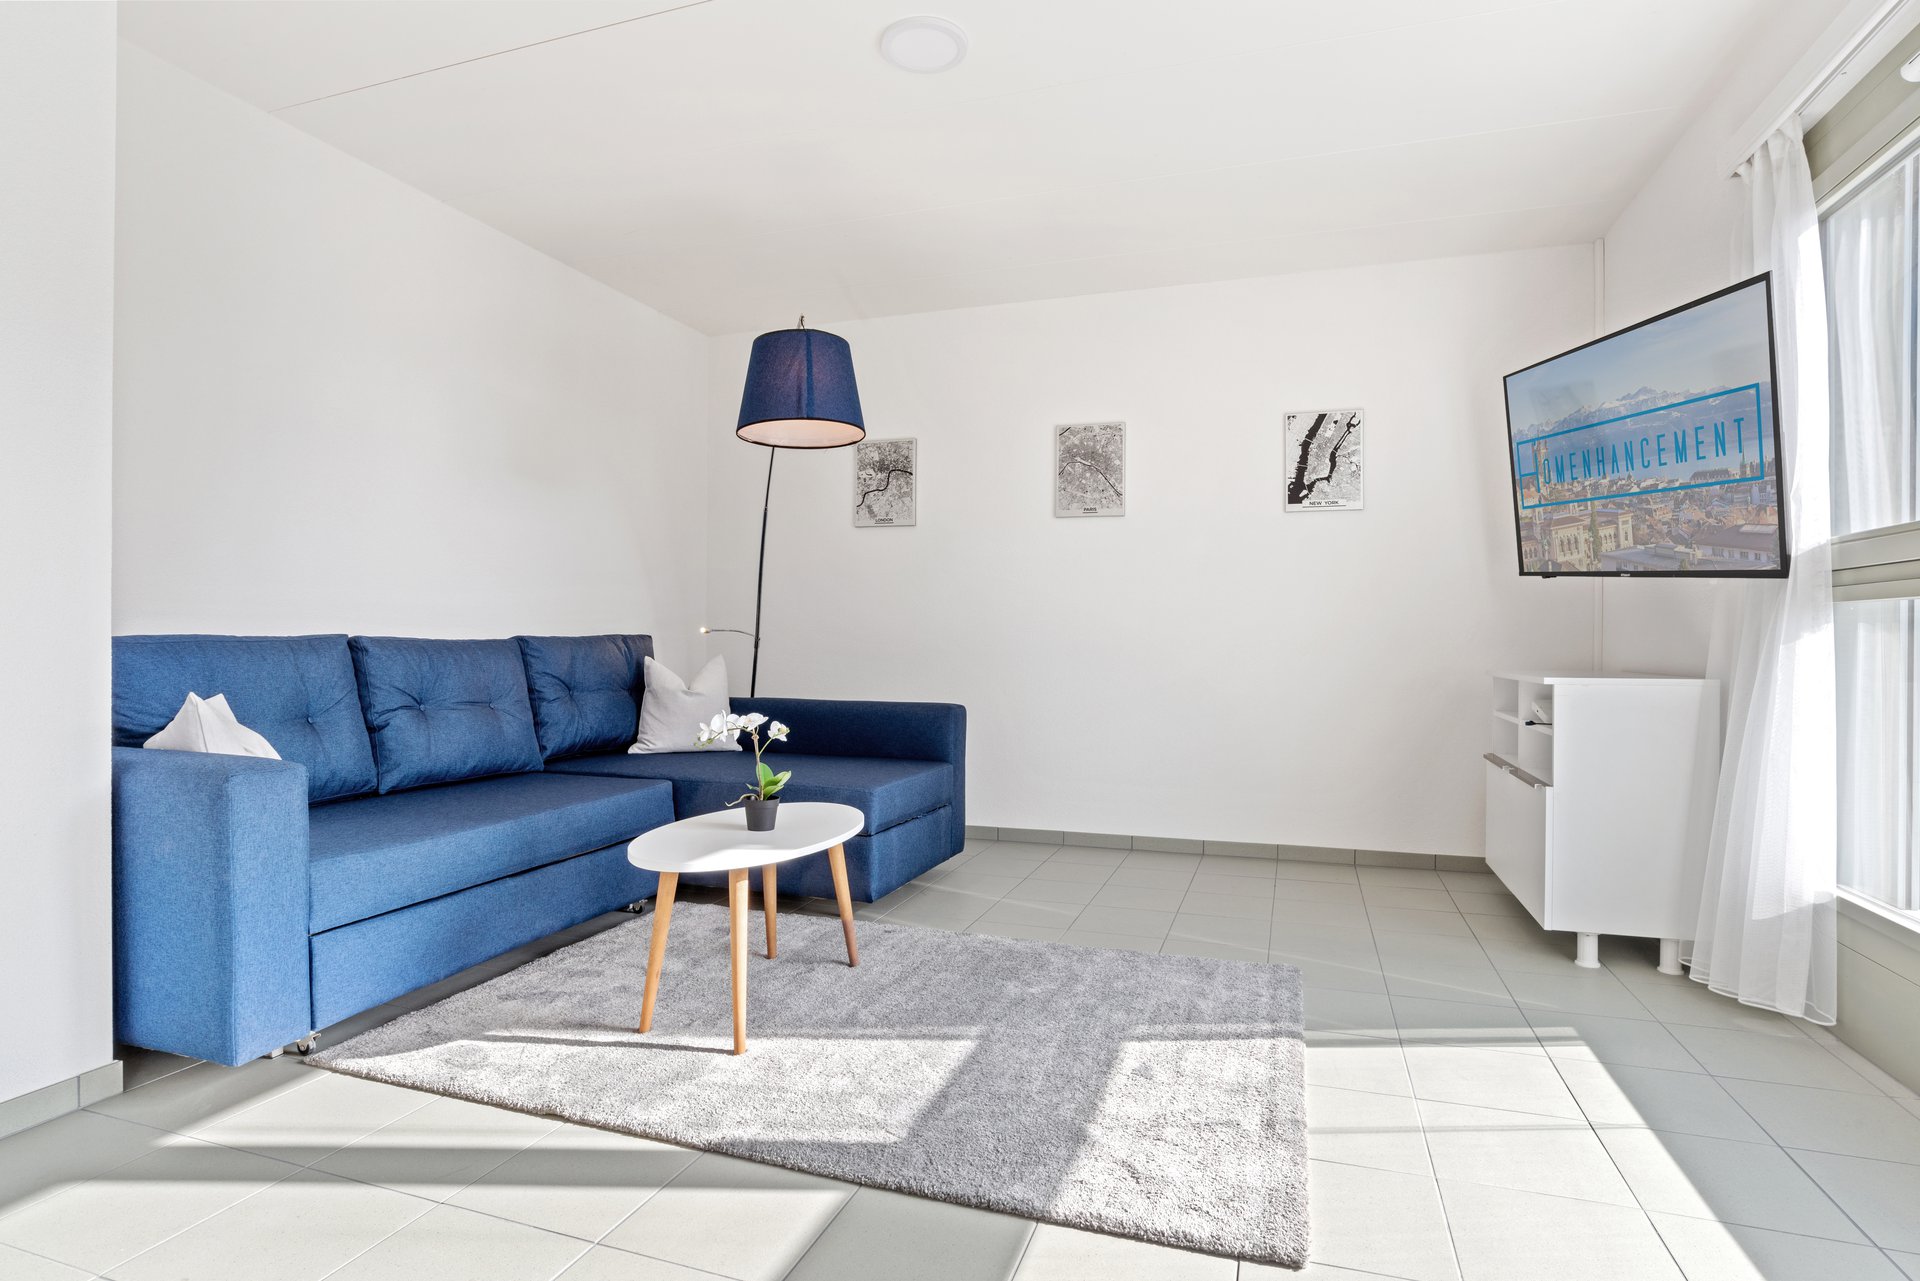 Ideally located, this eco-friendly residence remain close to the city center of Lausanne, with a close access to the Parc of 